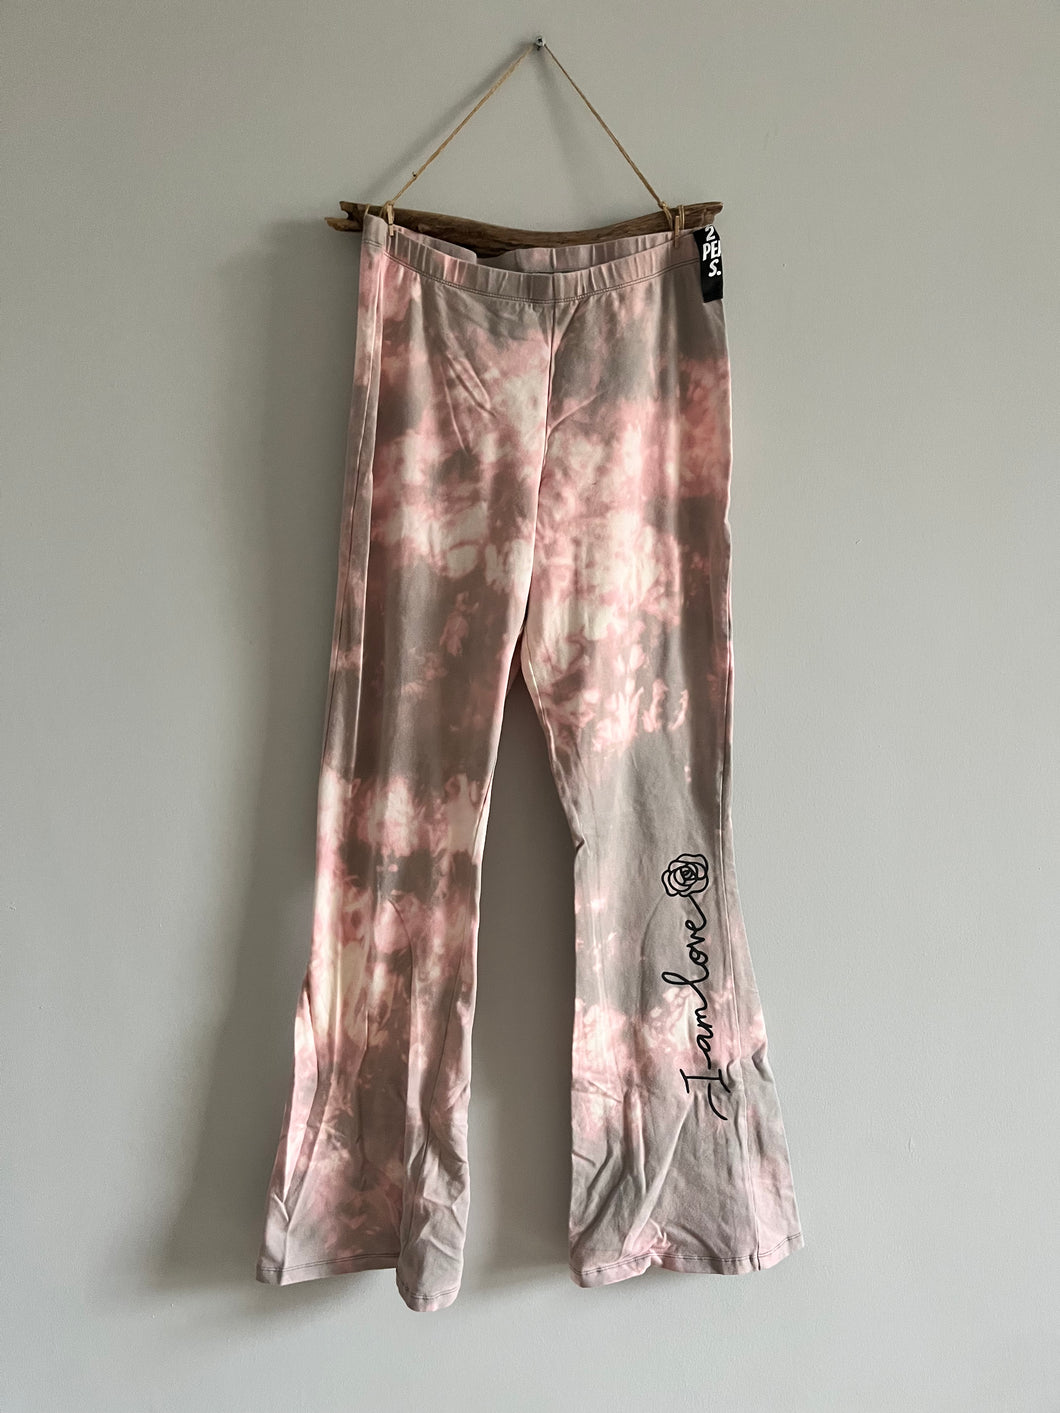 Tie-Dye Pink and Grey 'I am Love' Flares